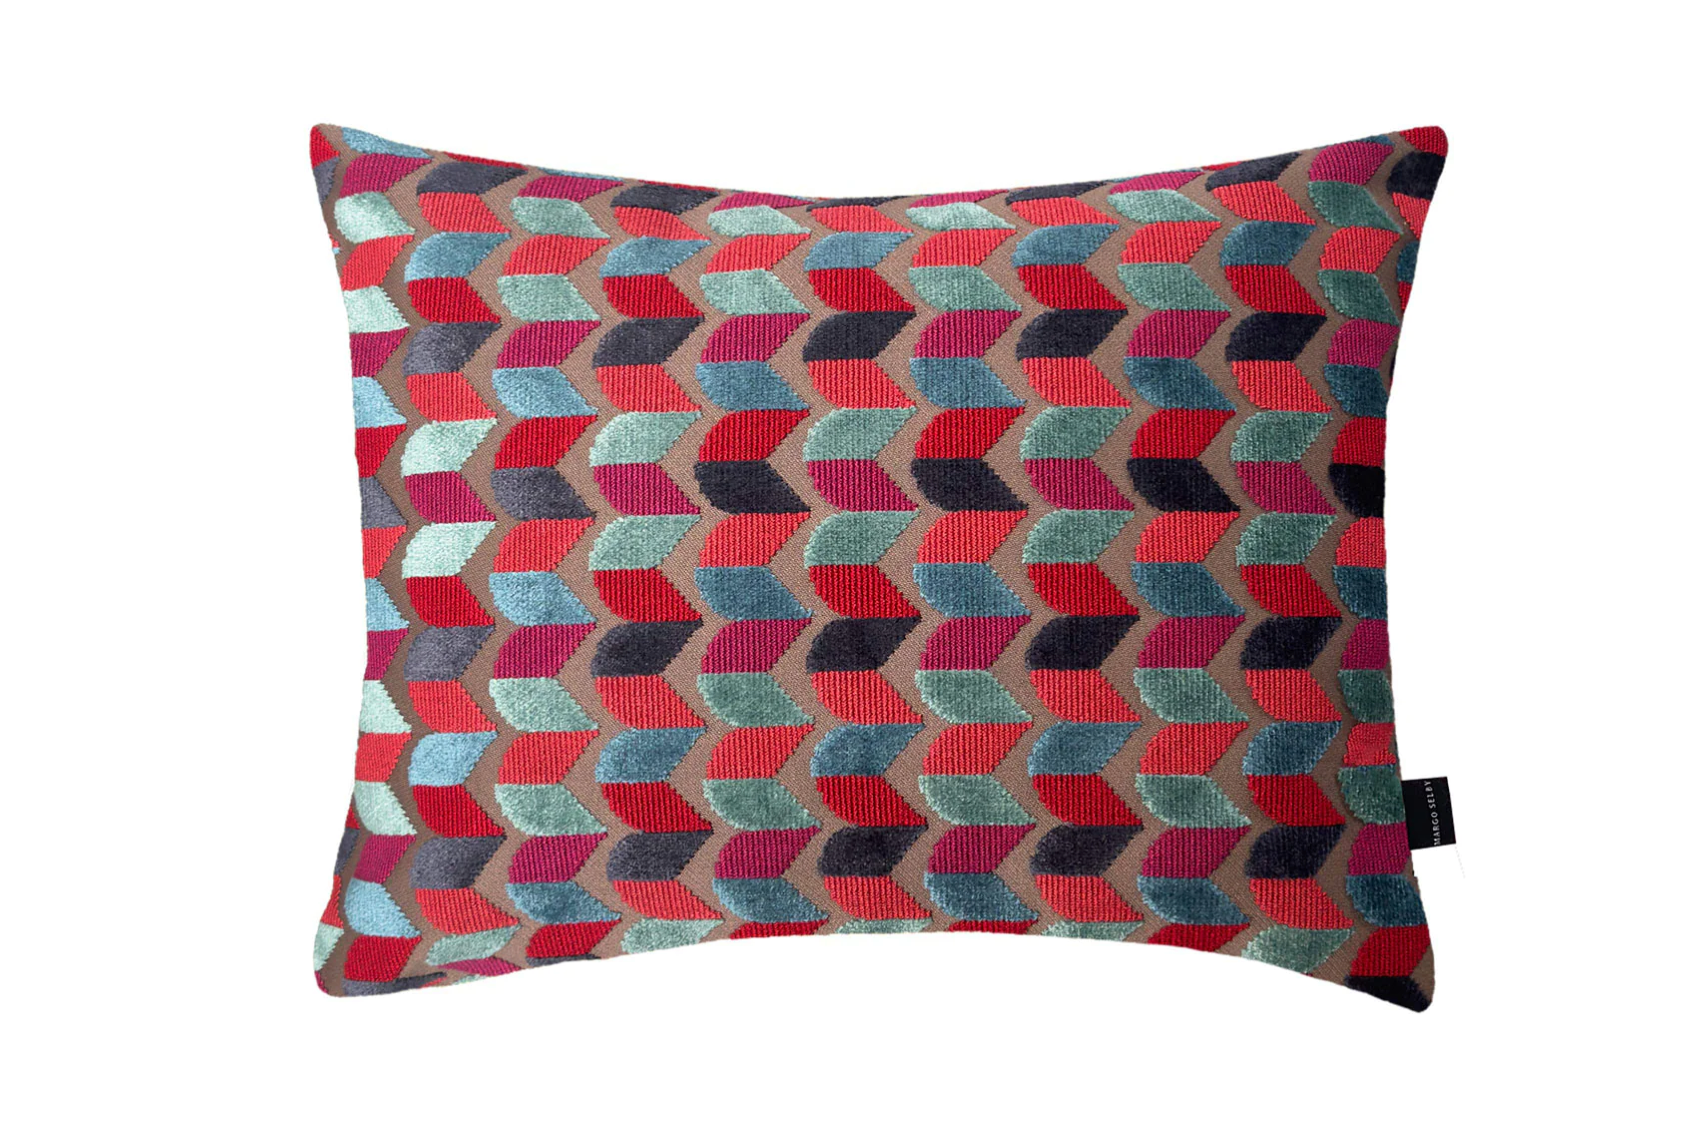 Basie Cherry pillow by Margo Selby